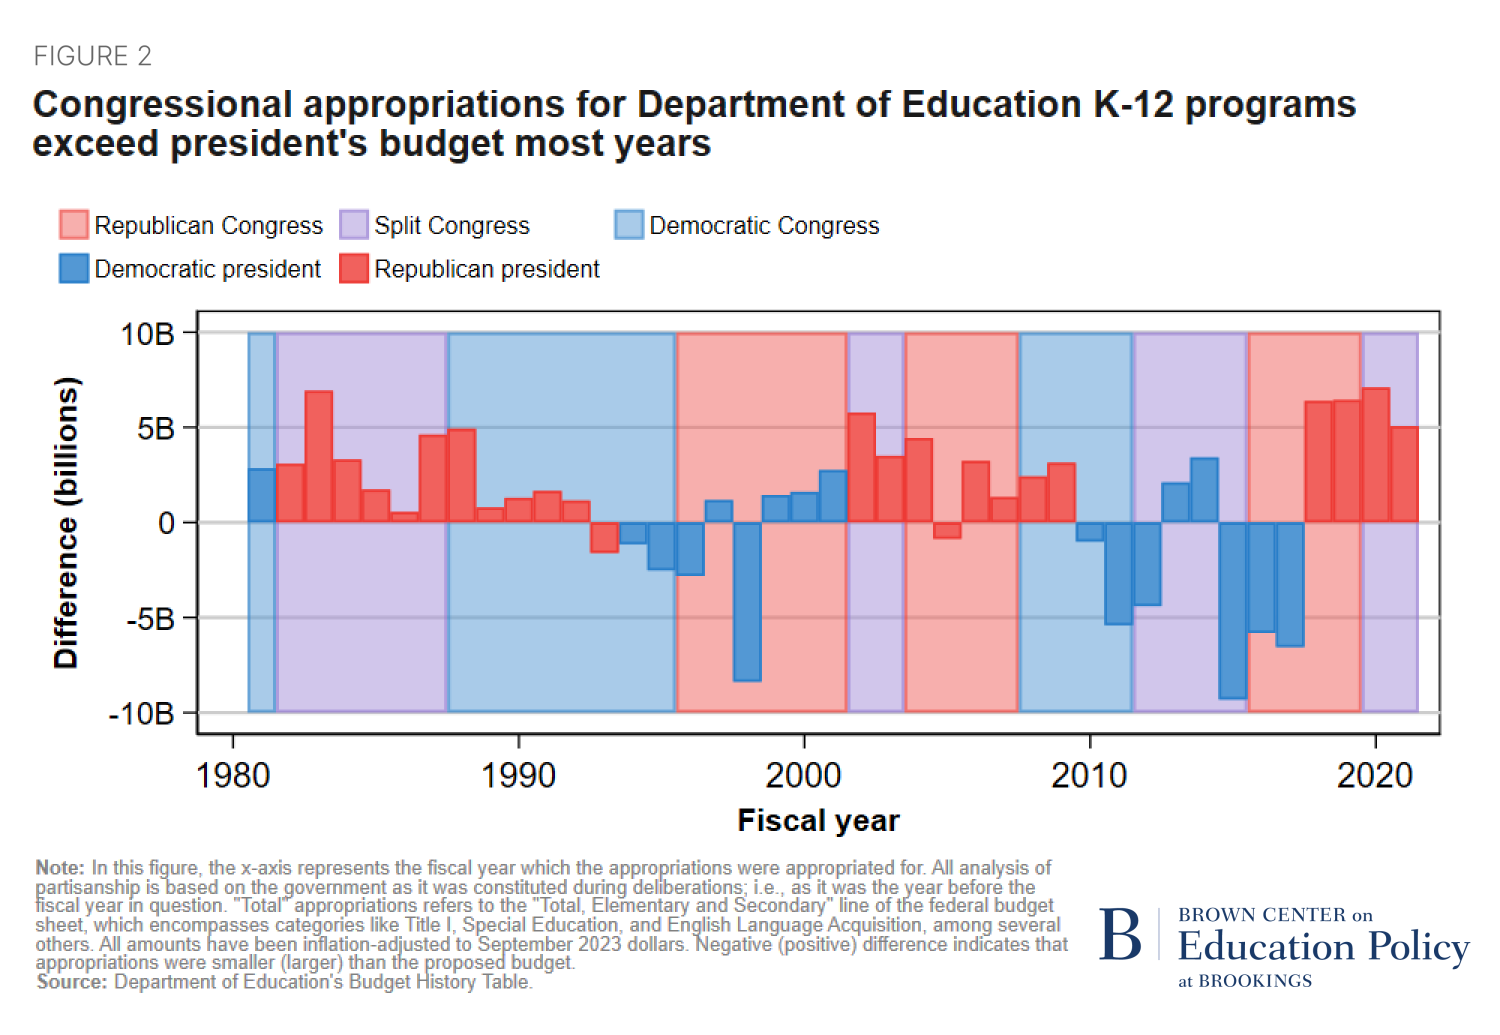 Figure depicting congressional appropriations for Department of Education K-12 programs exceed president's budget most years